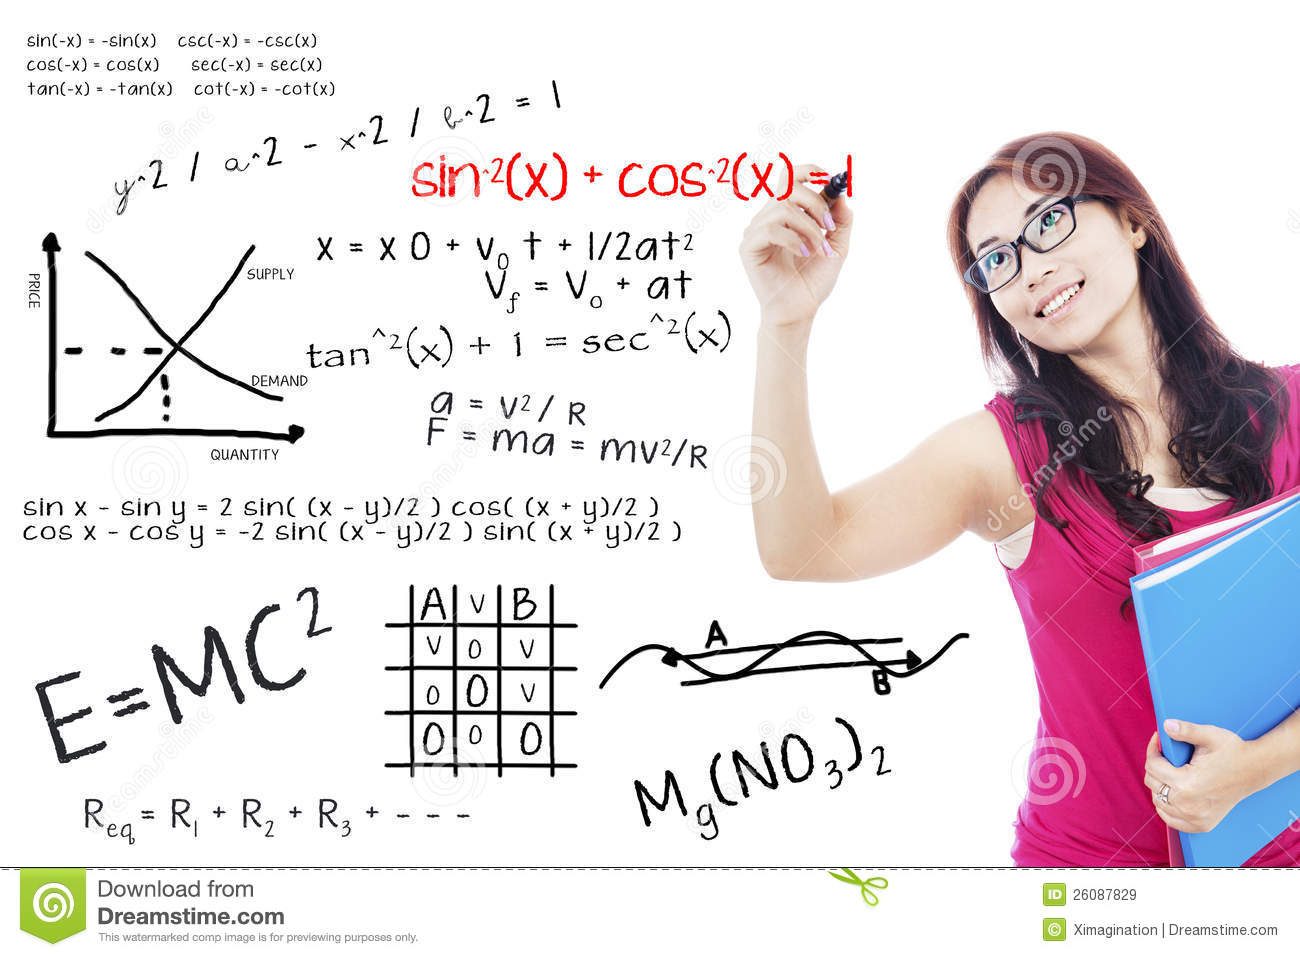 Mathematics Software For College Students